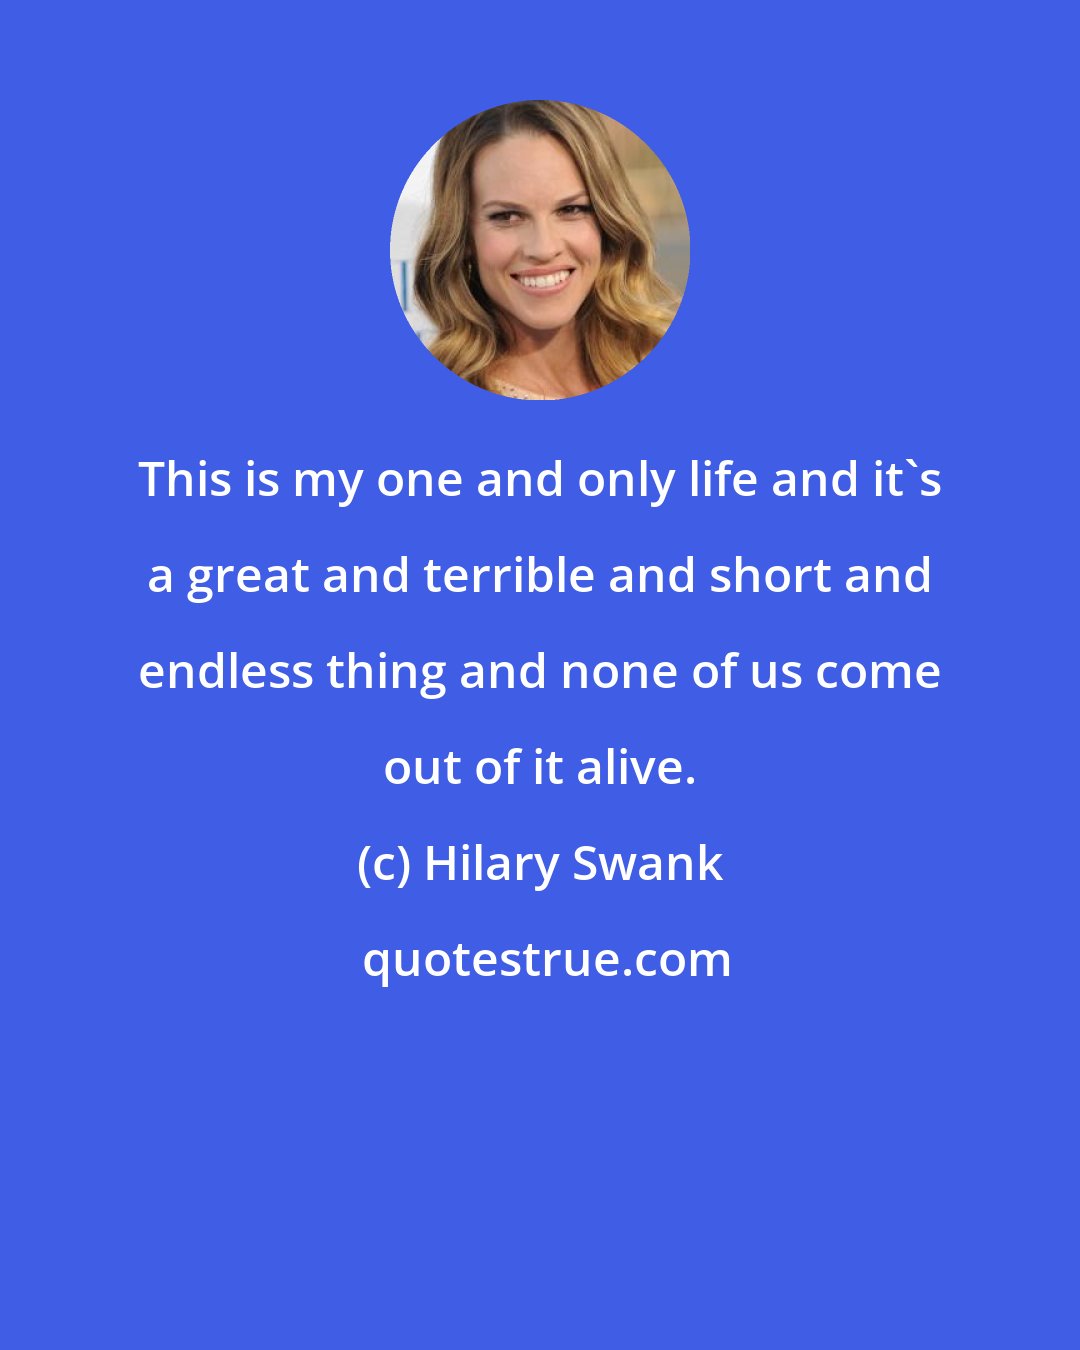 Hilary Swank: This is my one and only life and it's a great and terrible and short and endless thing and none of us come out of it alive.